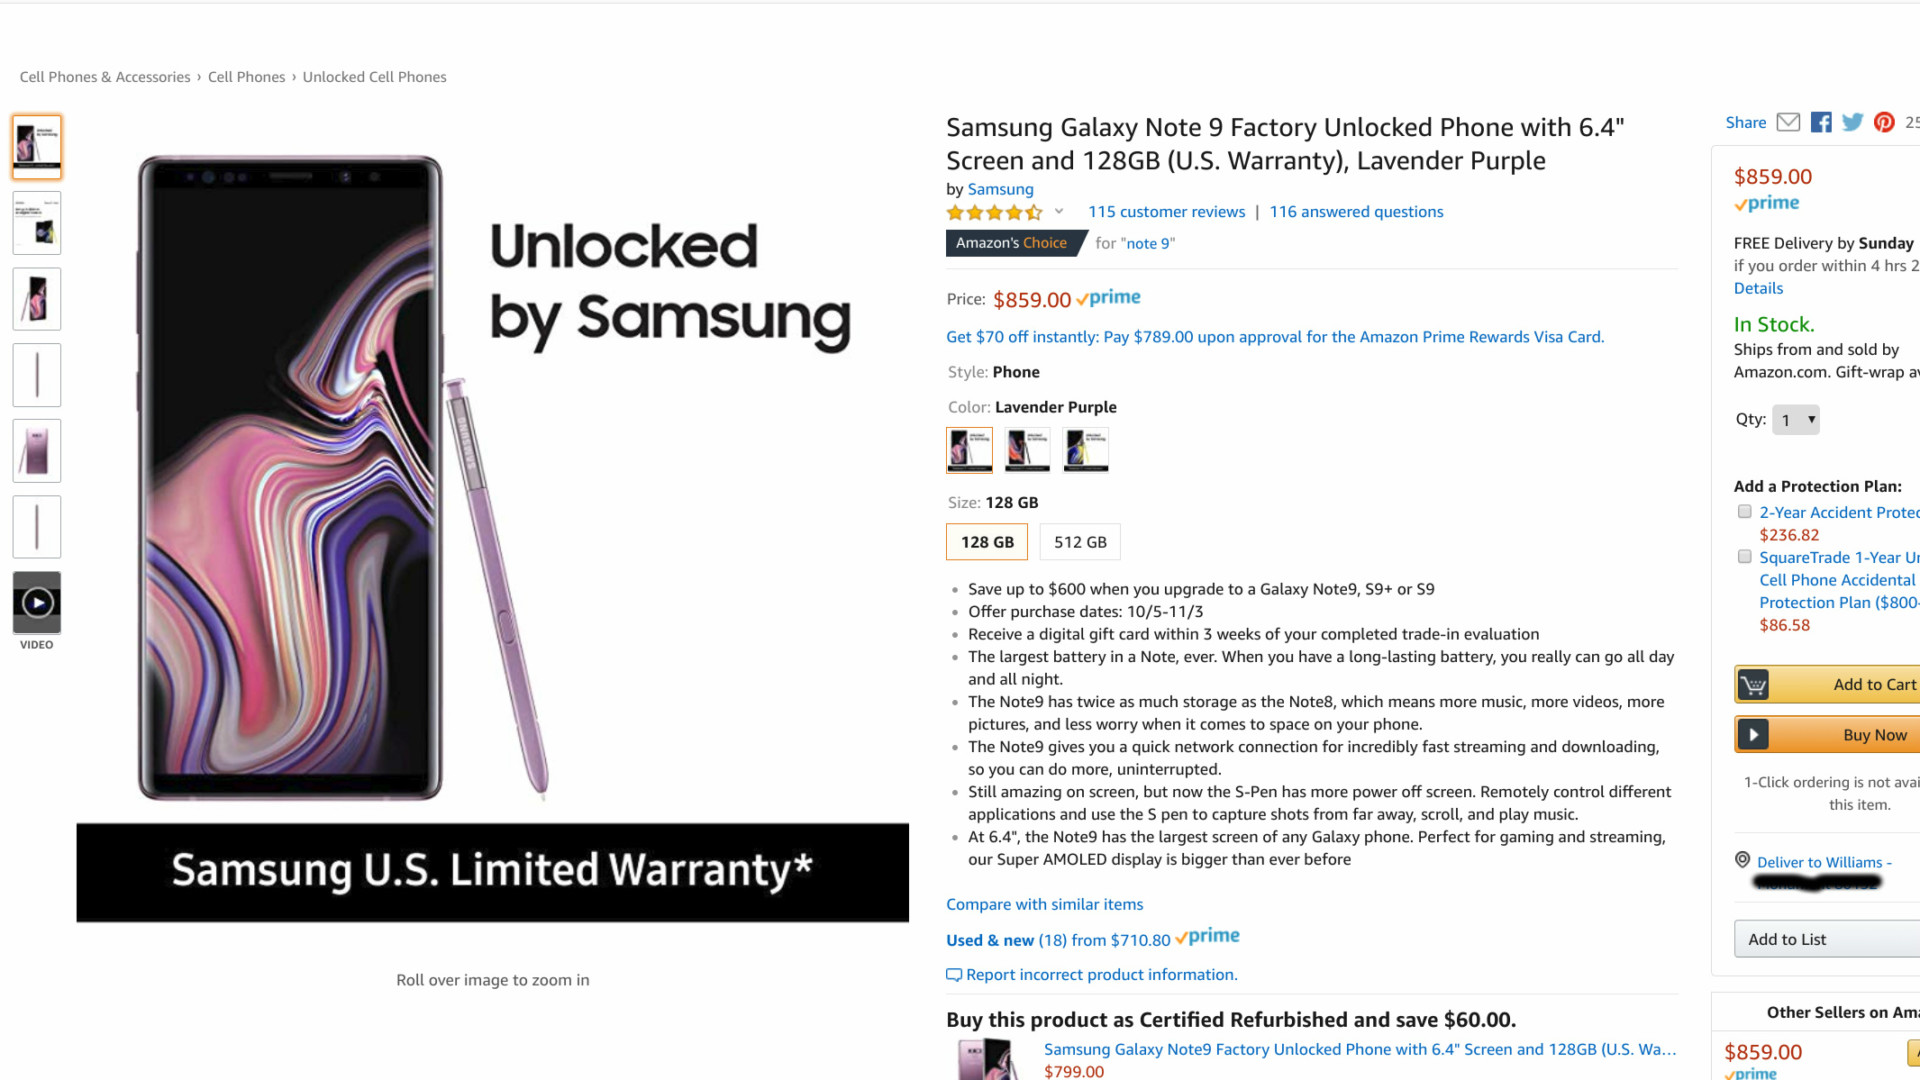 Amazon deal on the Samsung Galaxy Note 9